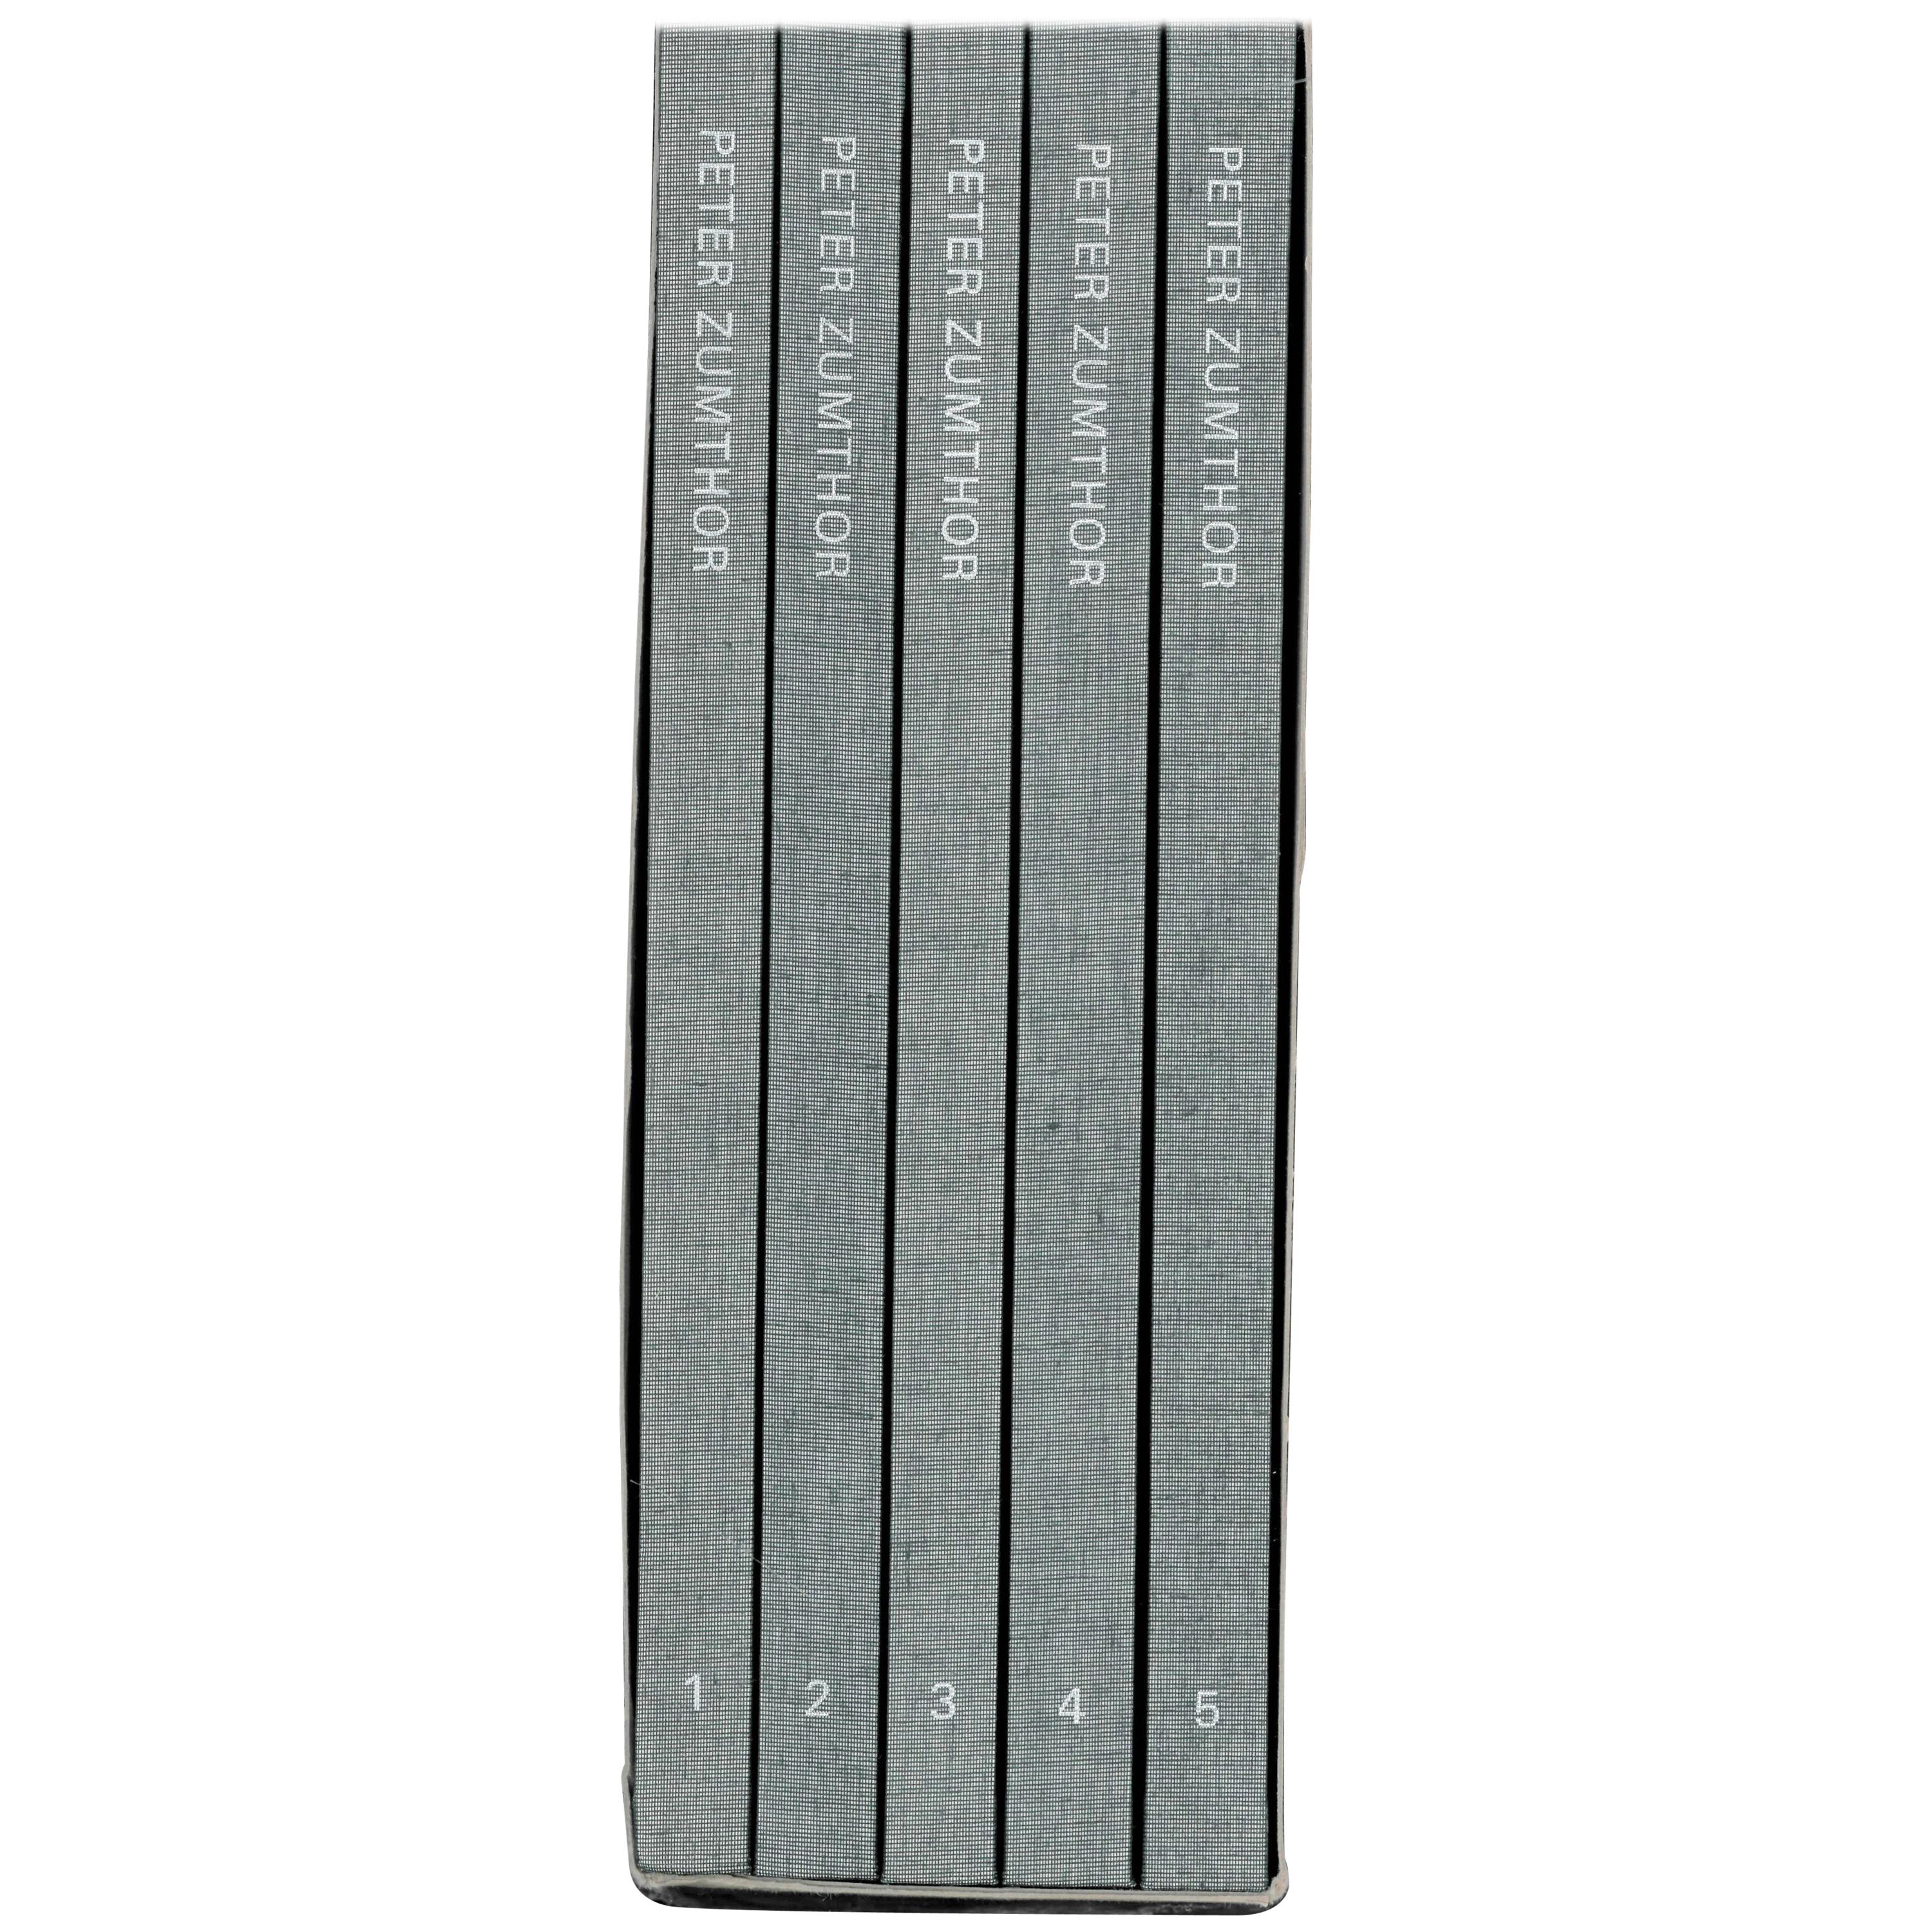 Peter Zumthor 1985-2013: Buildings and Projects Edited by Thomas (Book) For Sale